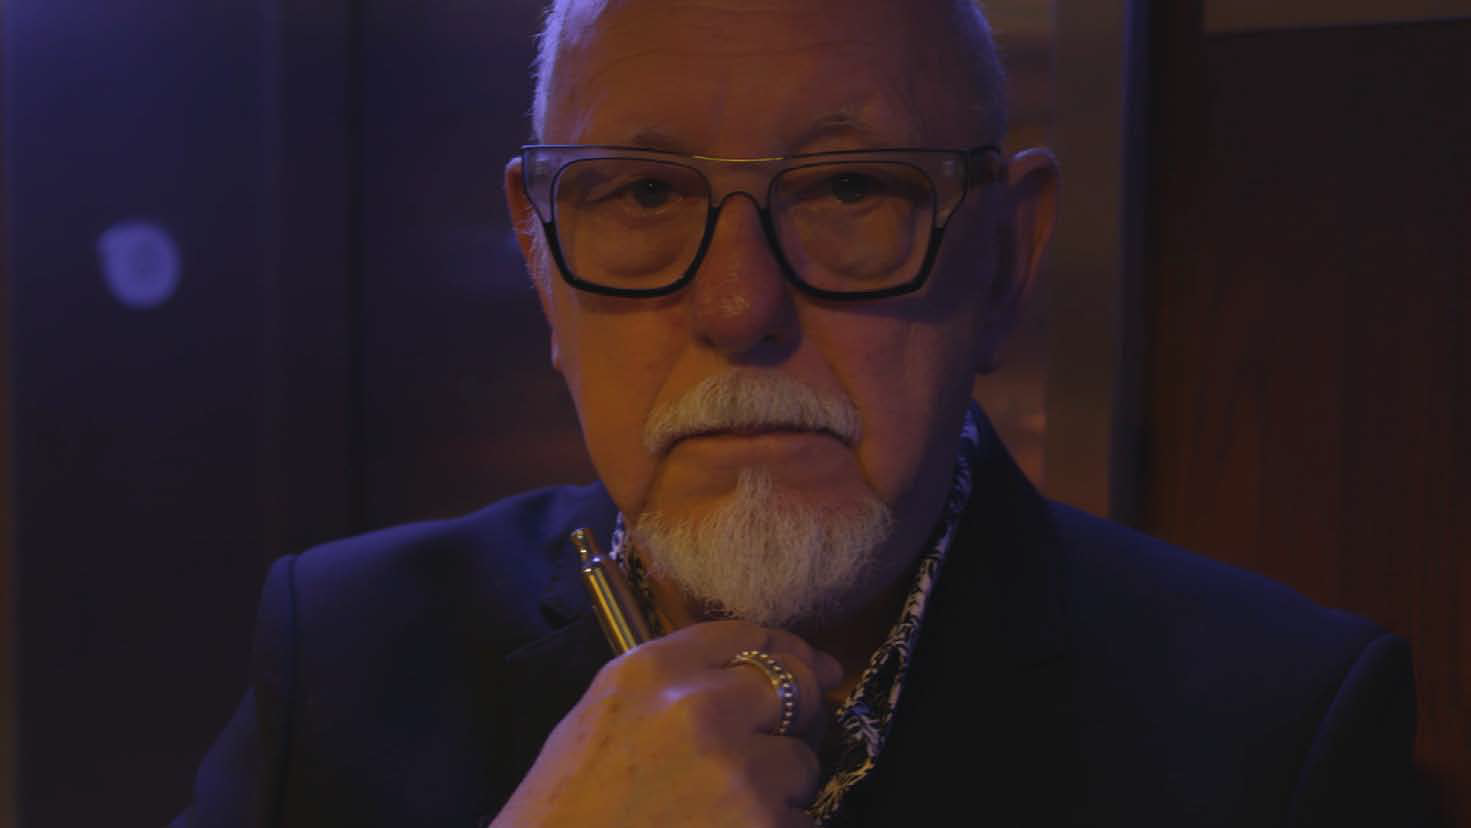 Image of film showing close up of older man in glasses. Part of a series of films and images exploring the lifestyles of older male members of the LGBTQ community.